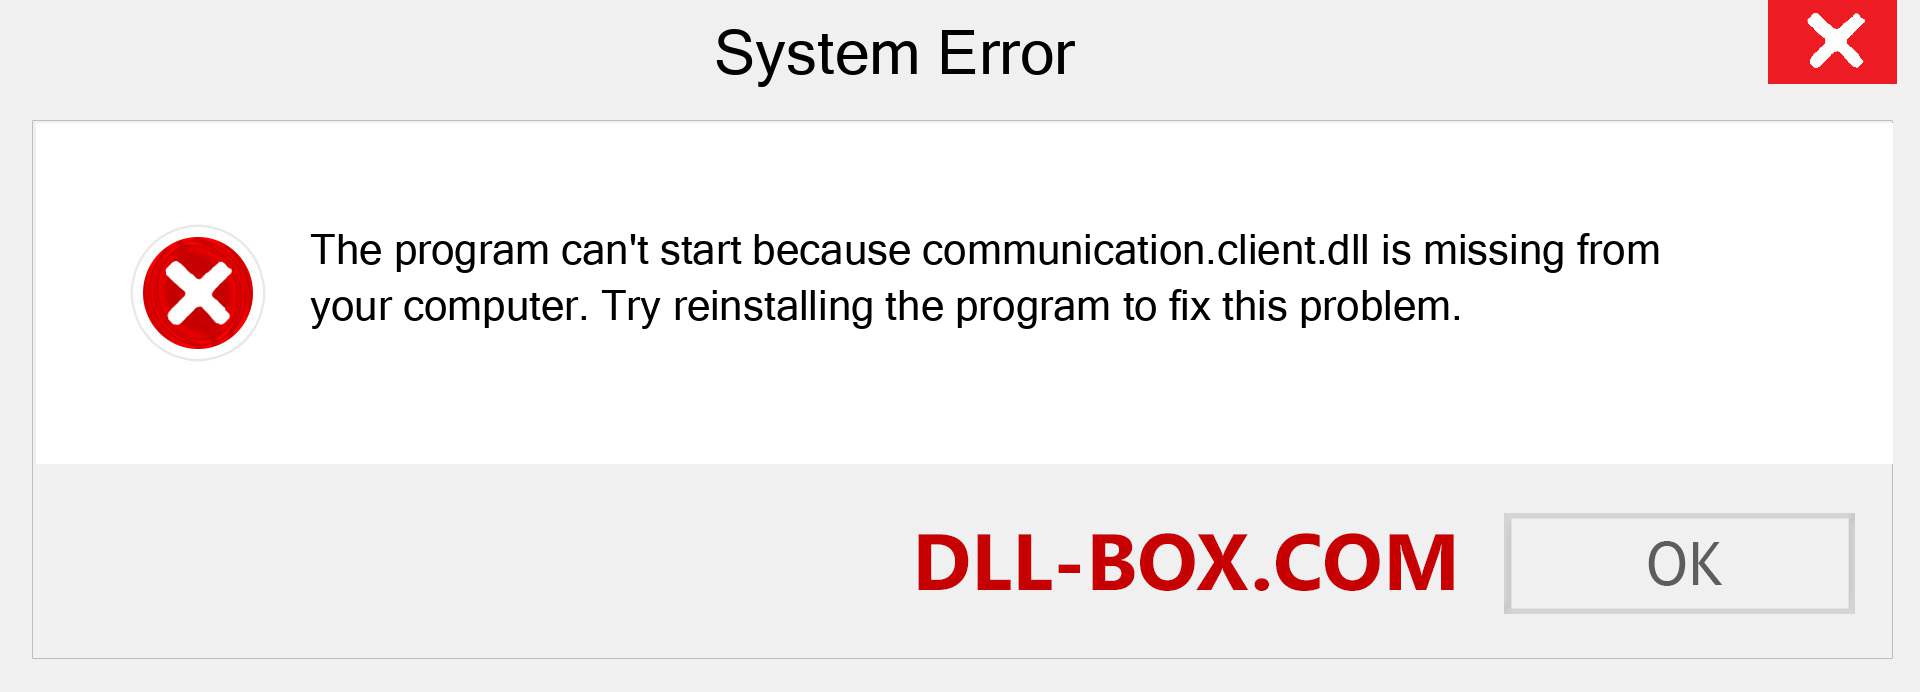  communication.client.dll file is missing?. Download for Windows 7, 8, 10 - Fix  communication.client dll Missing Error on Windows, photos, images